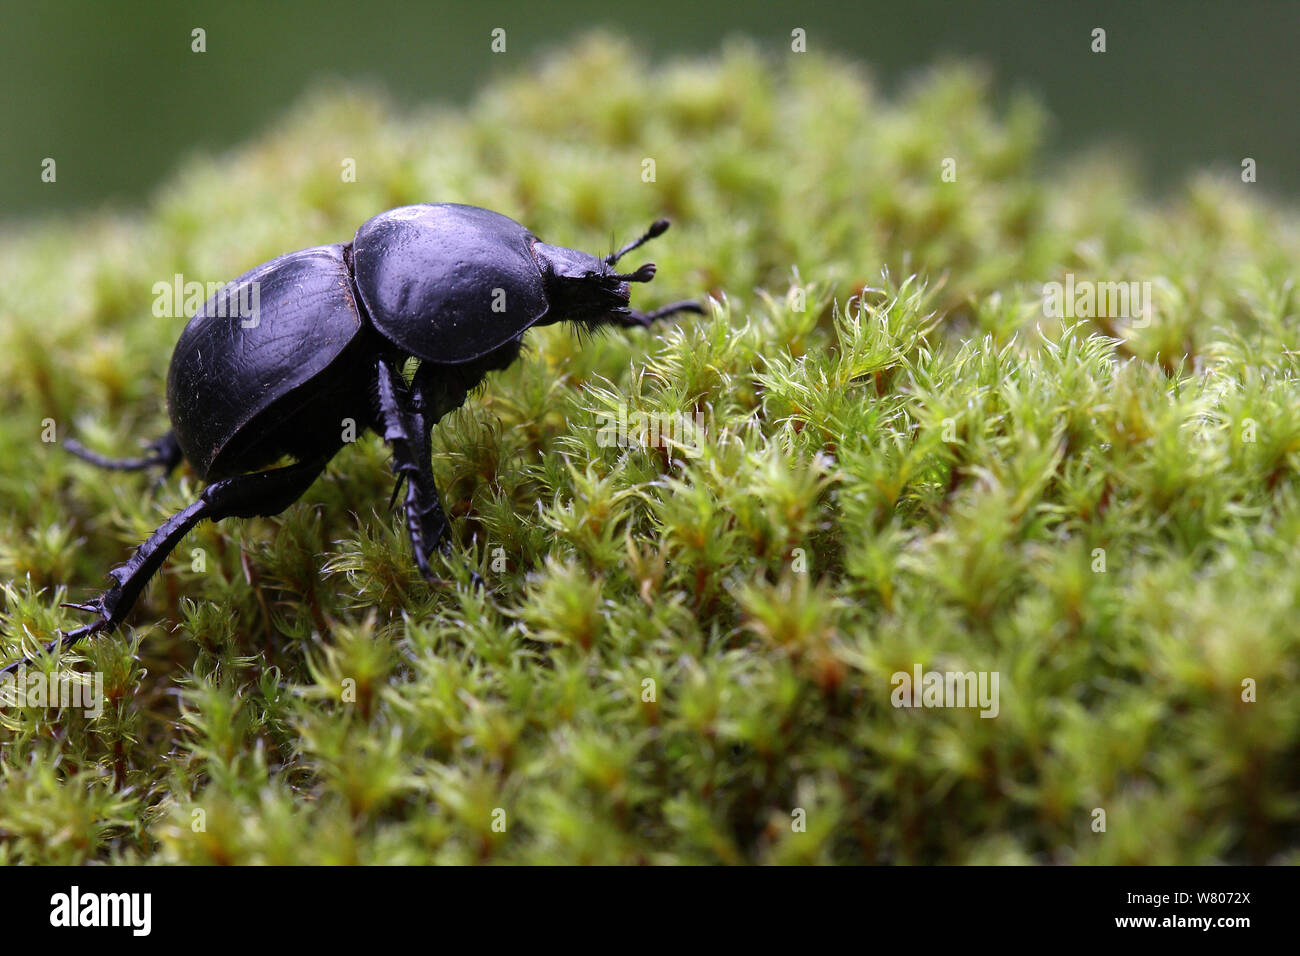 Dor Beetle (Geotrupes stercorarius) on moss, Corsica Island, France, September Stock Photo